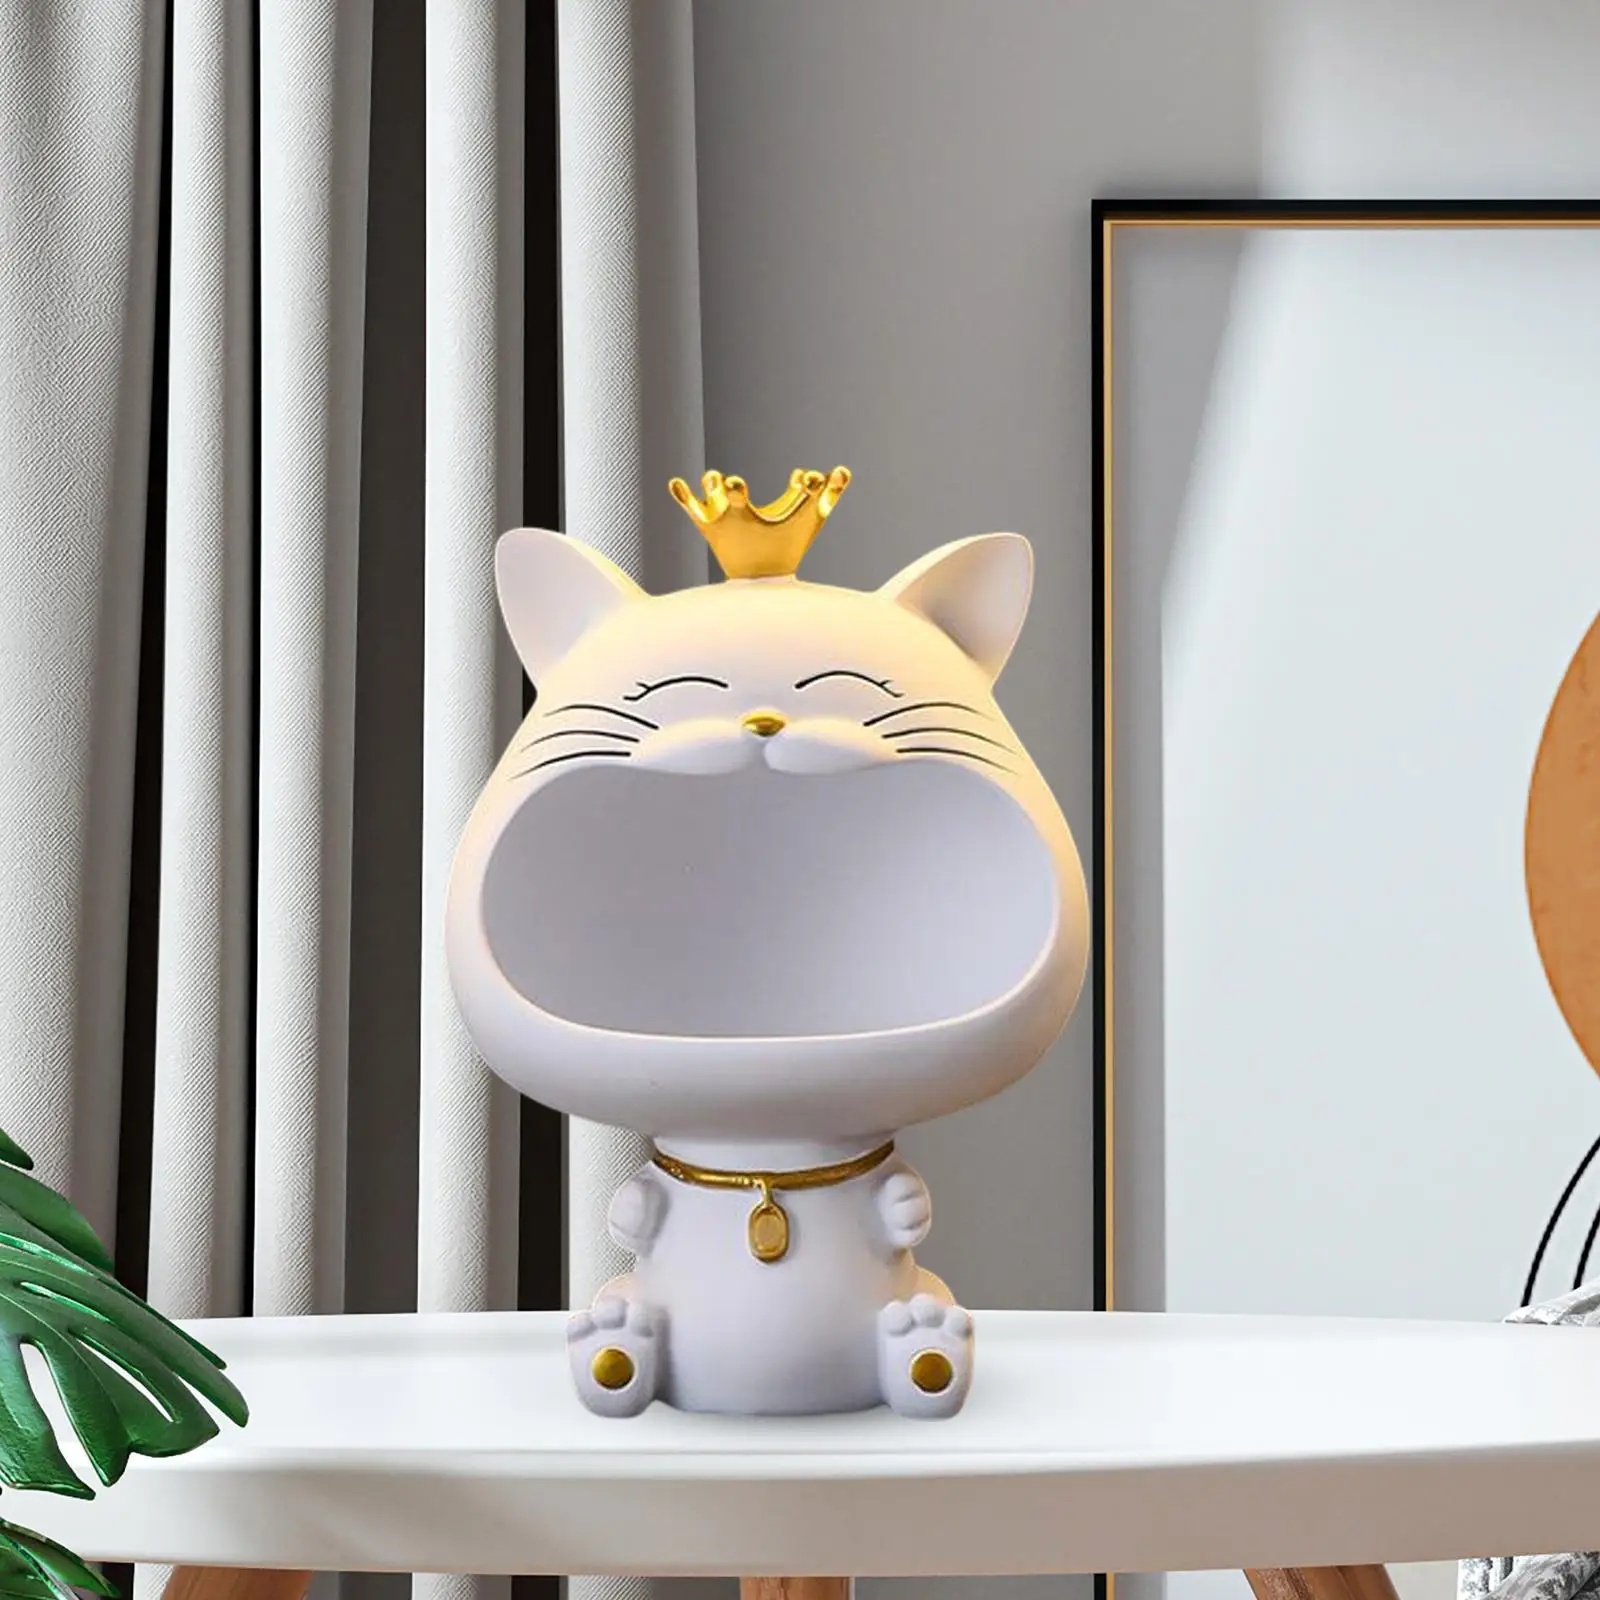 Modern Cat Figurine Snack Holder Abstract Sculpture Candy Sorting Storage Box for Party Home Office Decoration Birthday Gift